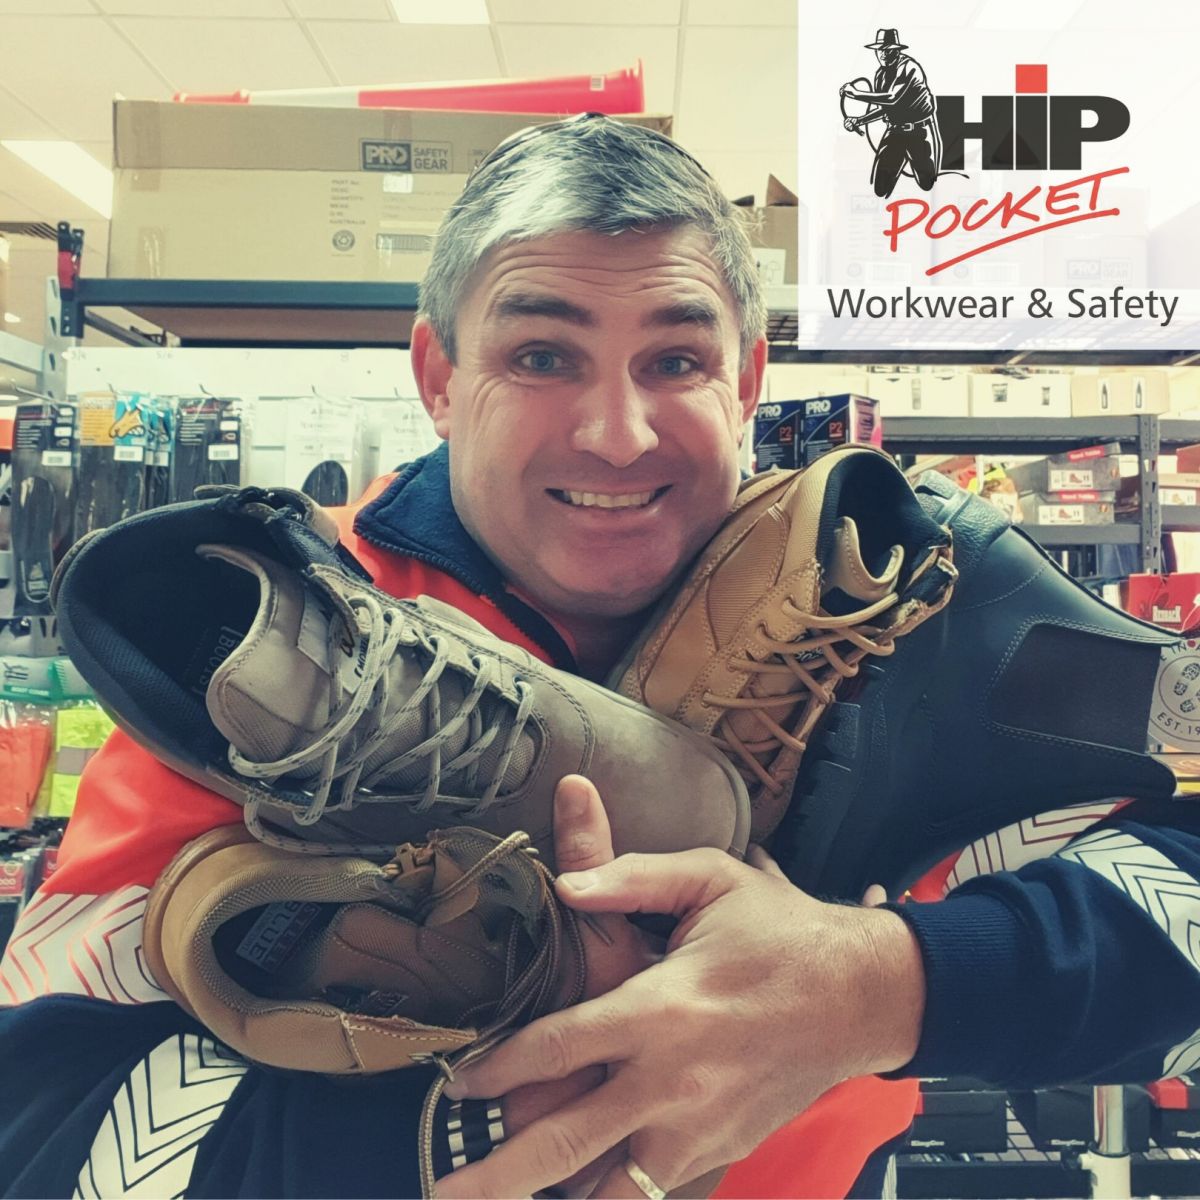 safety boots 1 - hip pocket workwear & safety toowoomba